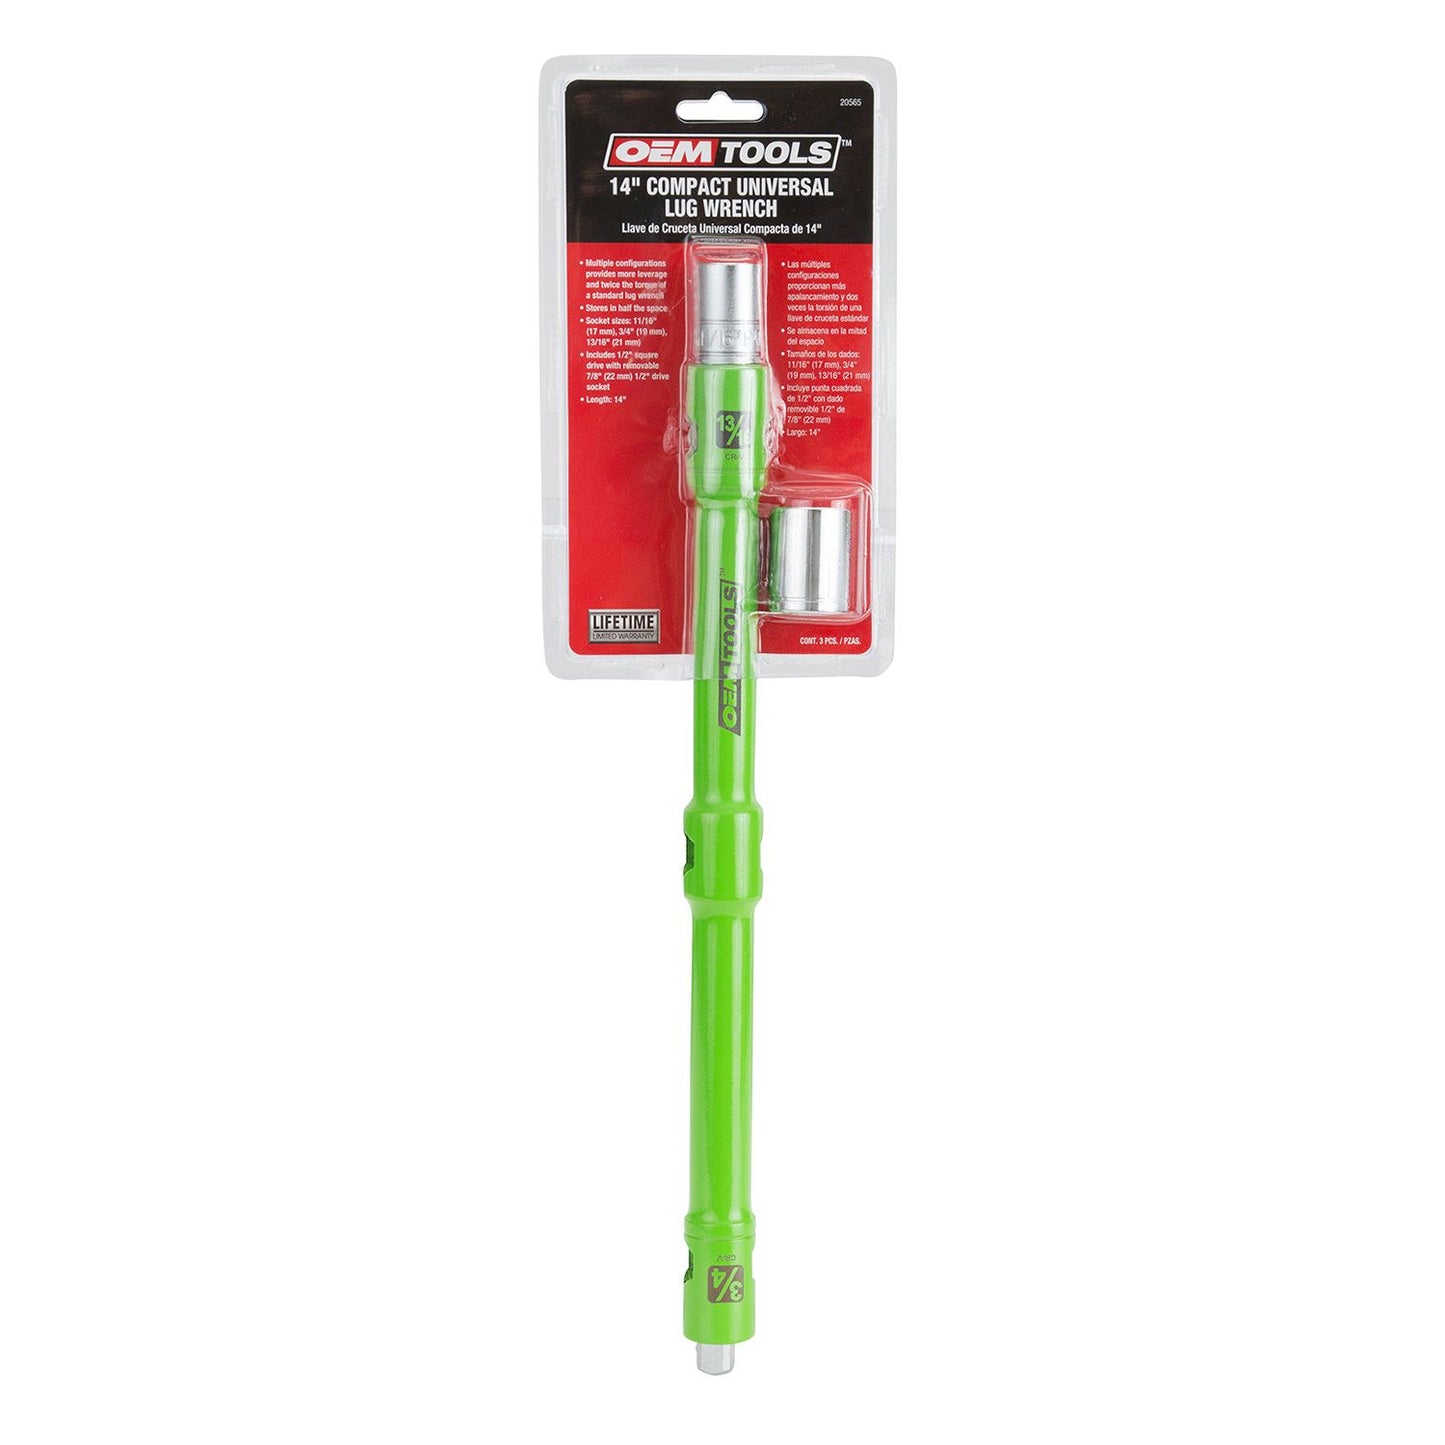 Oemtools 20565 Power Cross Compact Lug Nut Wrench